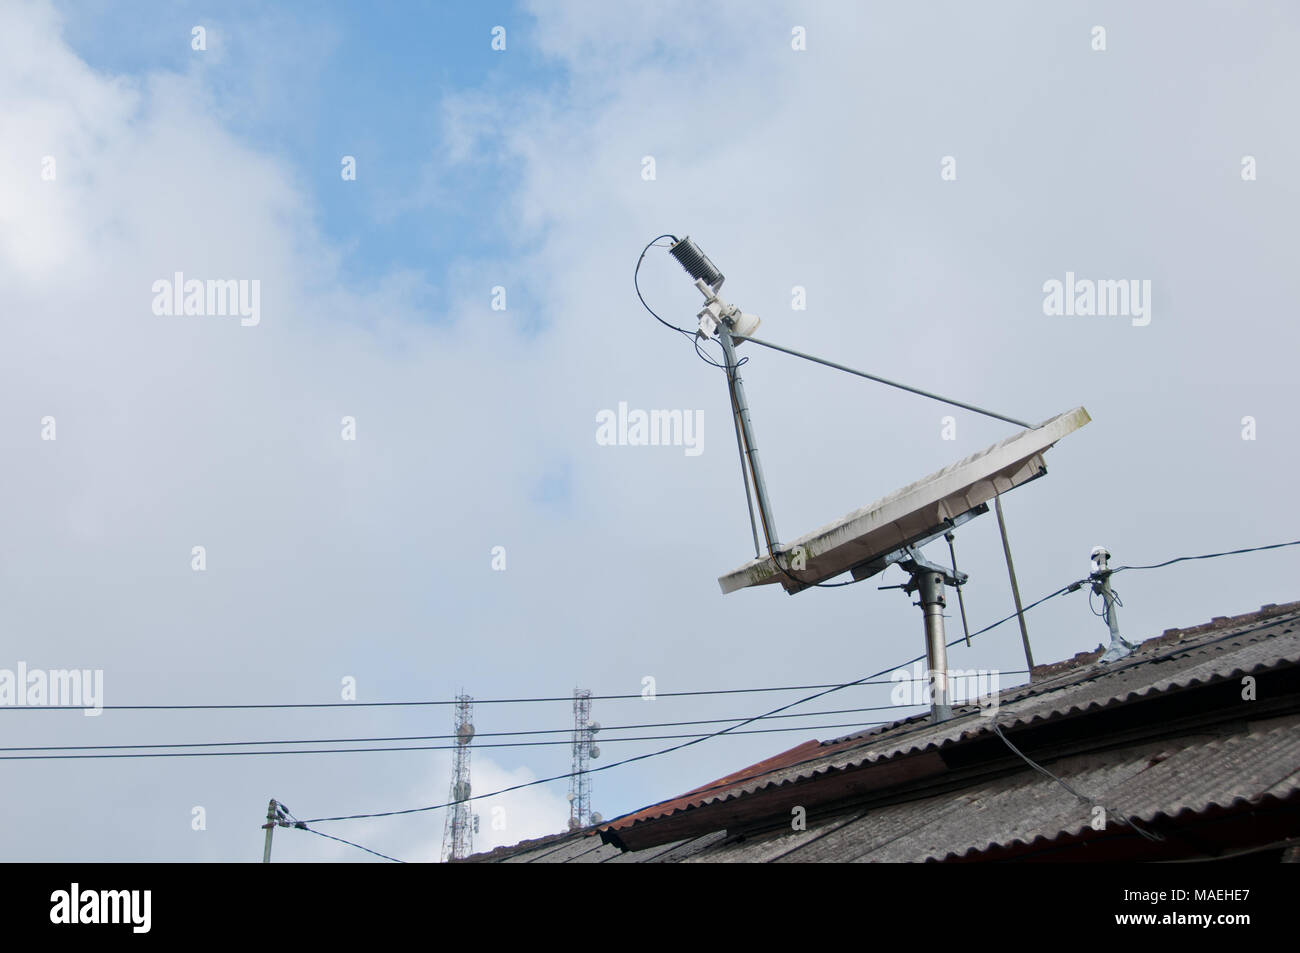 Modern high technology satellite on a roof with cloudy sky Stock Photo